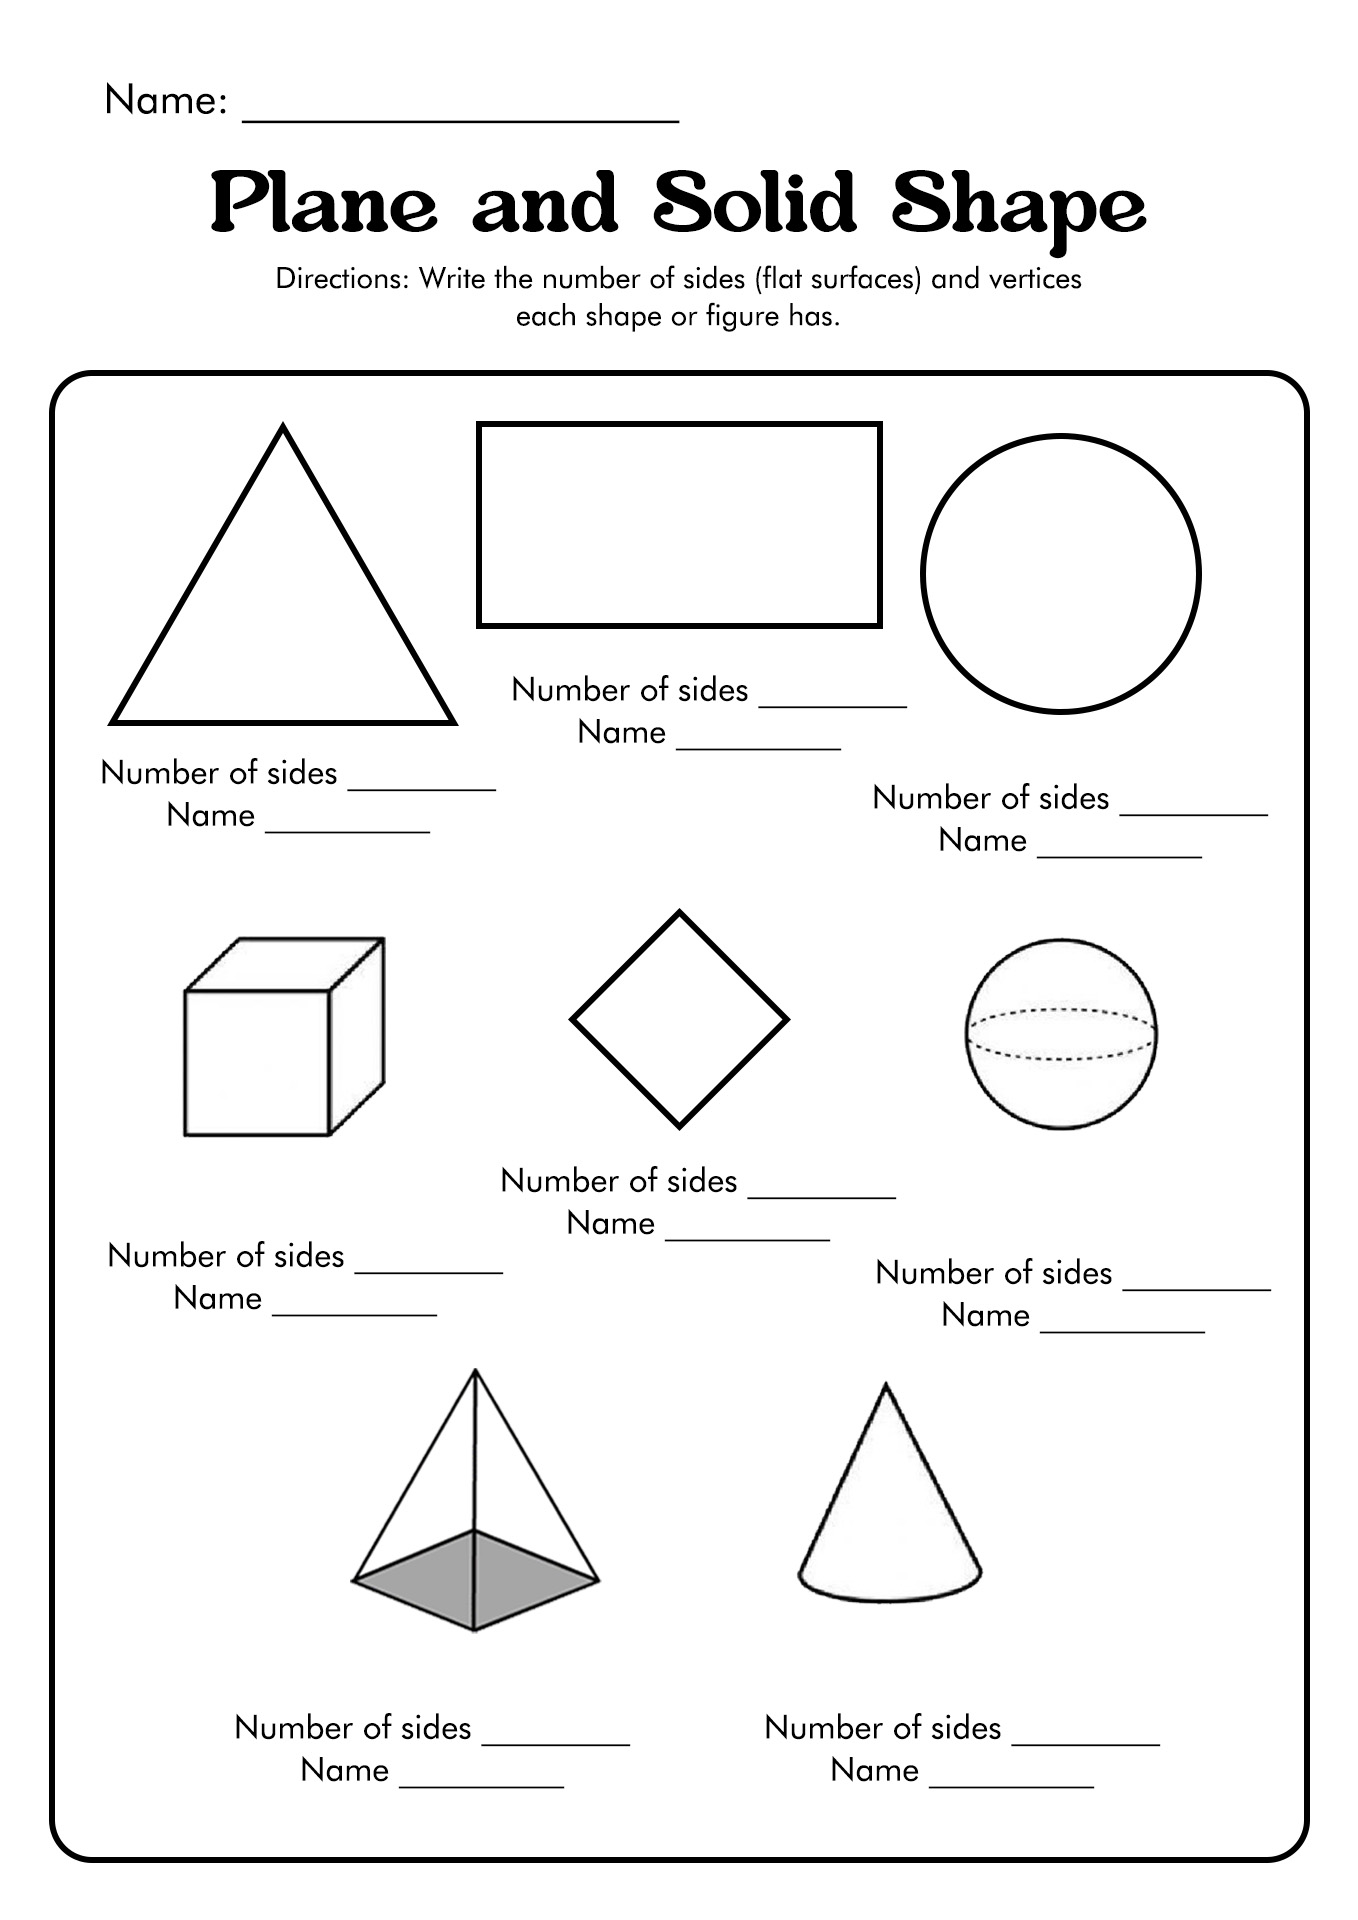 Plane and Solid Shape Activities